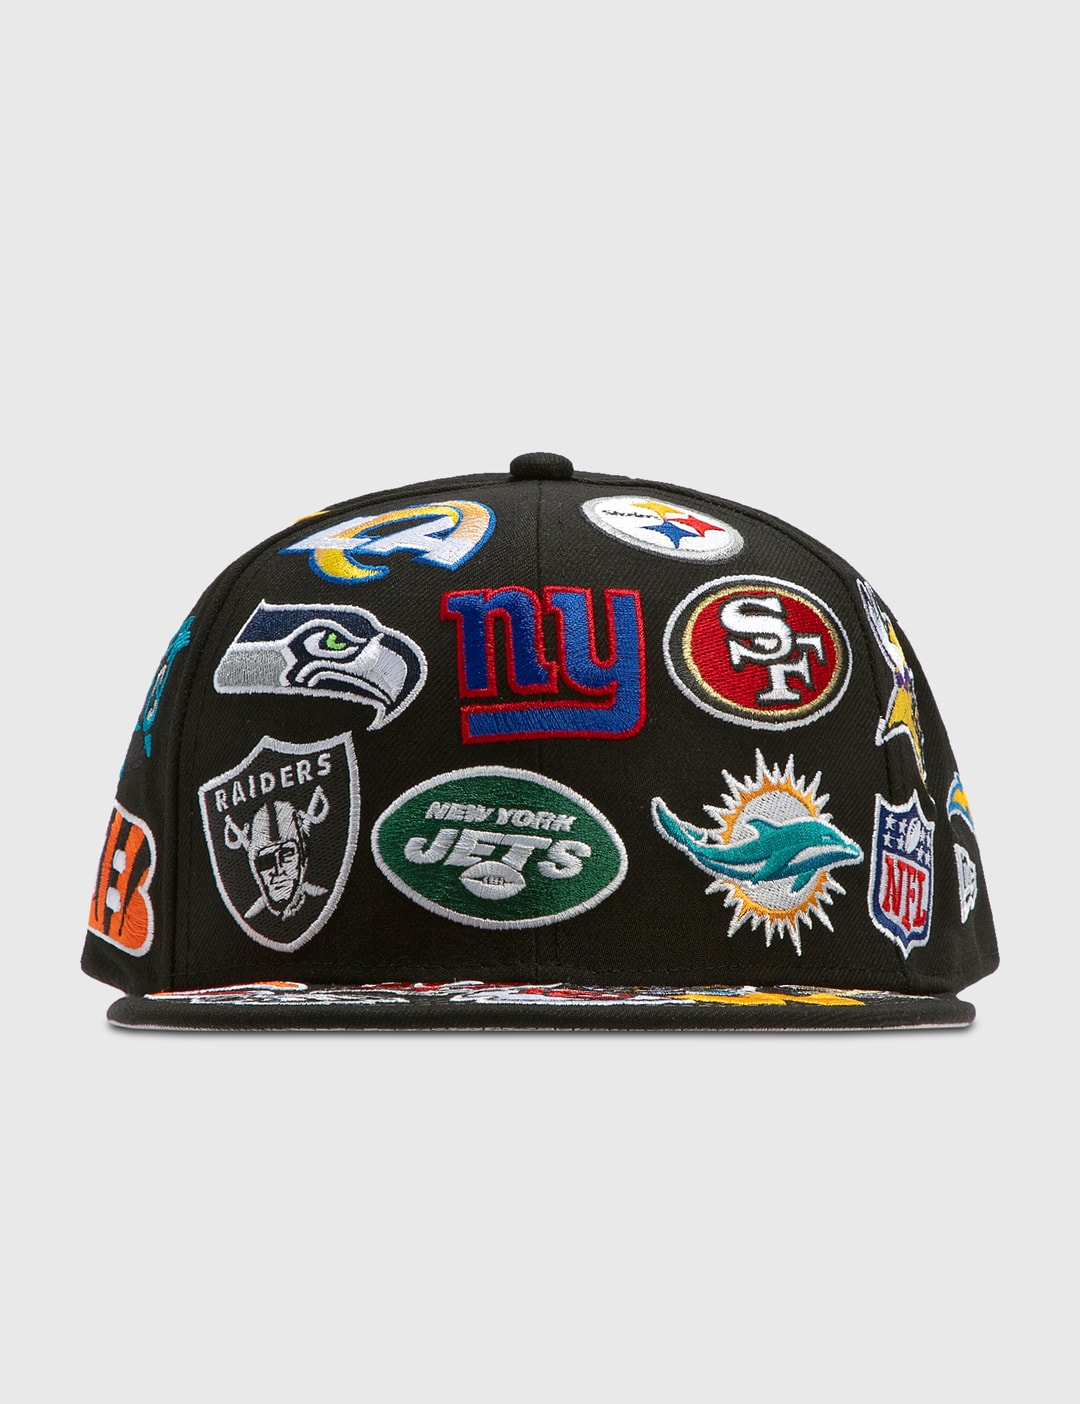 nfl hat with all team logos